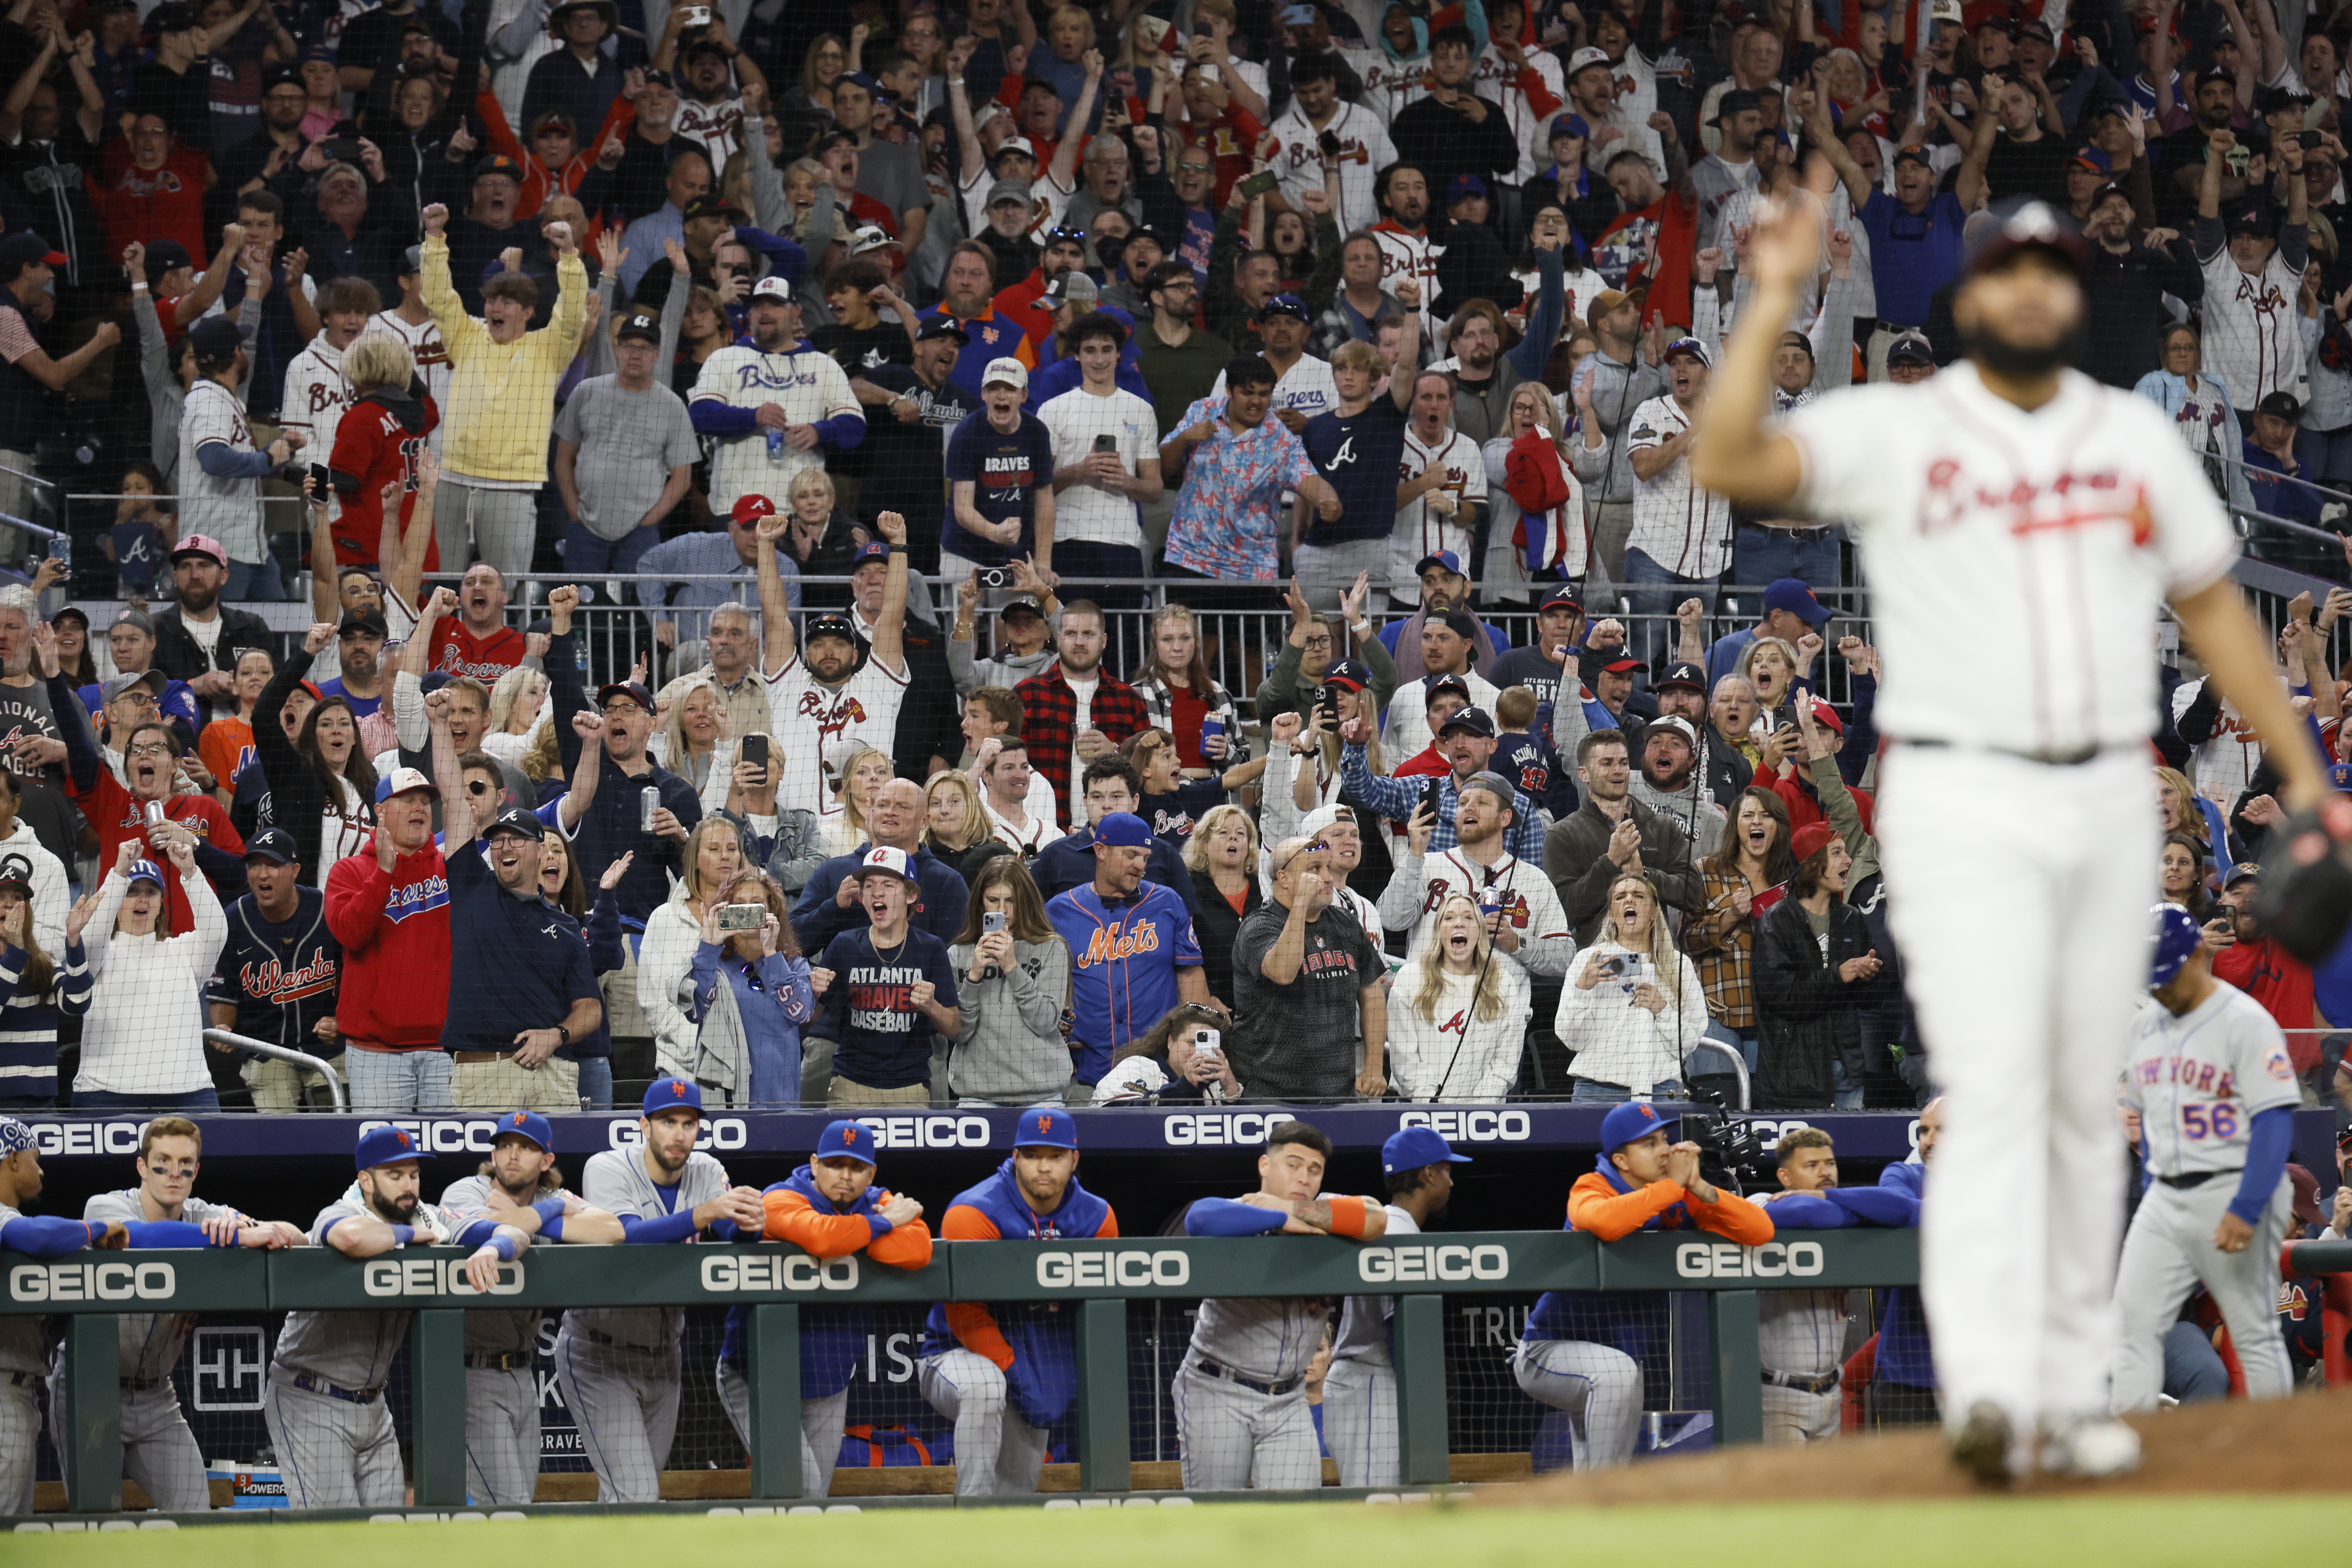 Revisiting the Mets' sweep of the Braves in first-ever National